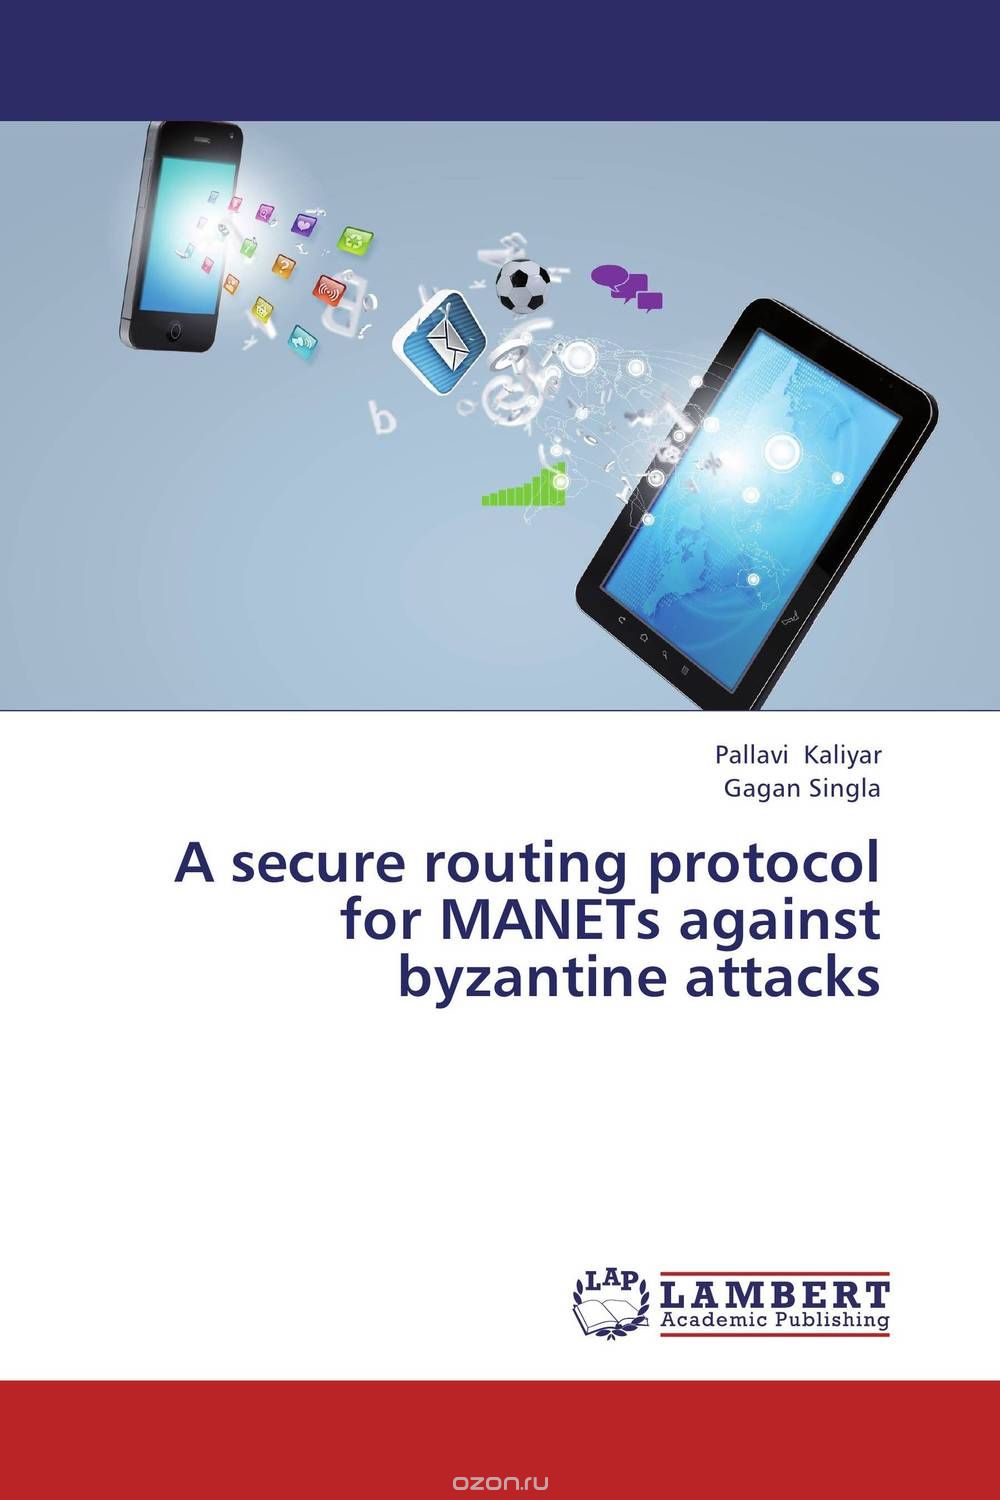 Скачать книгу "A secure routing protocol for MANETs against byzantine attacks"